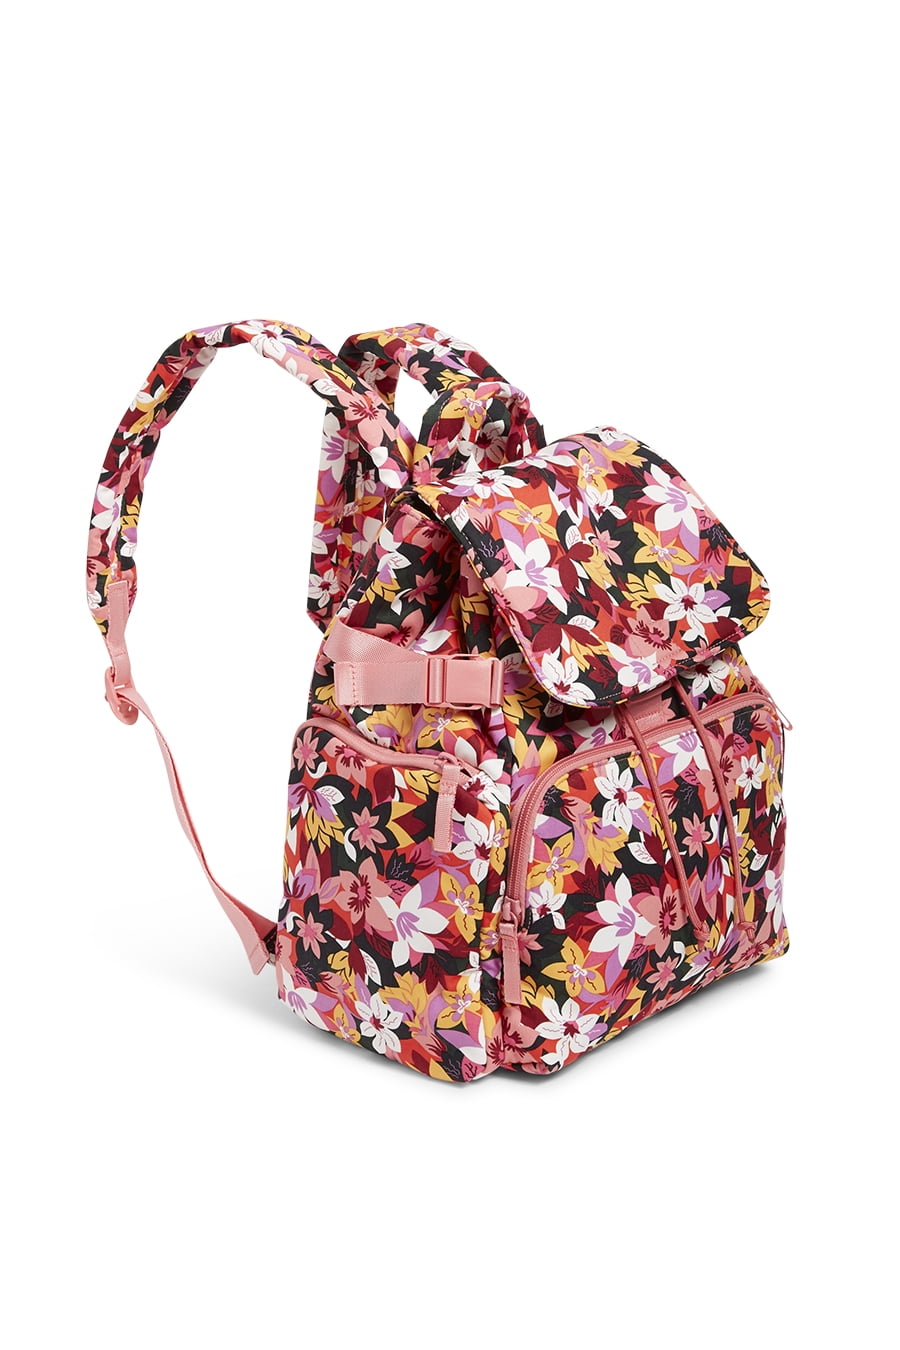 Vera Bradley Women's Recycled Cotton Utility Backpack Rosa Floral 